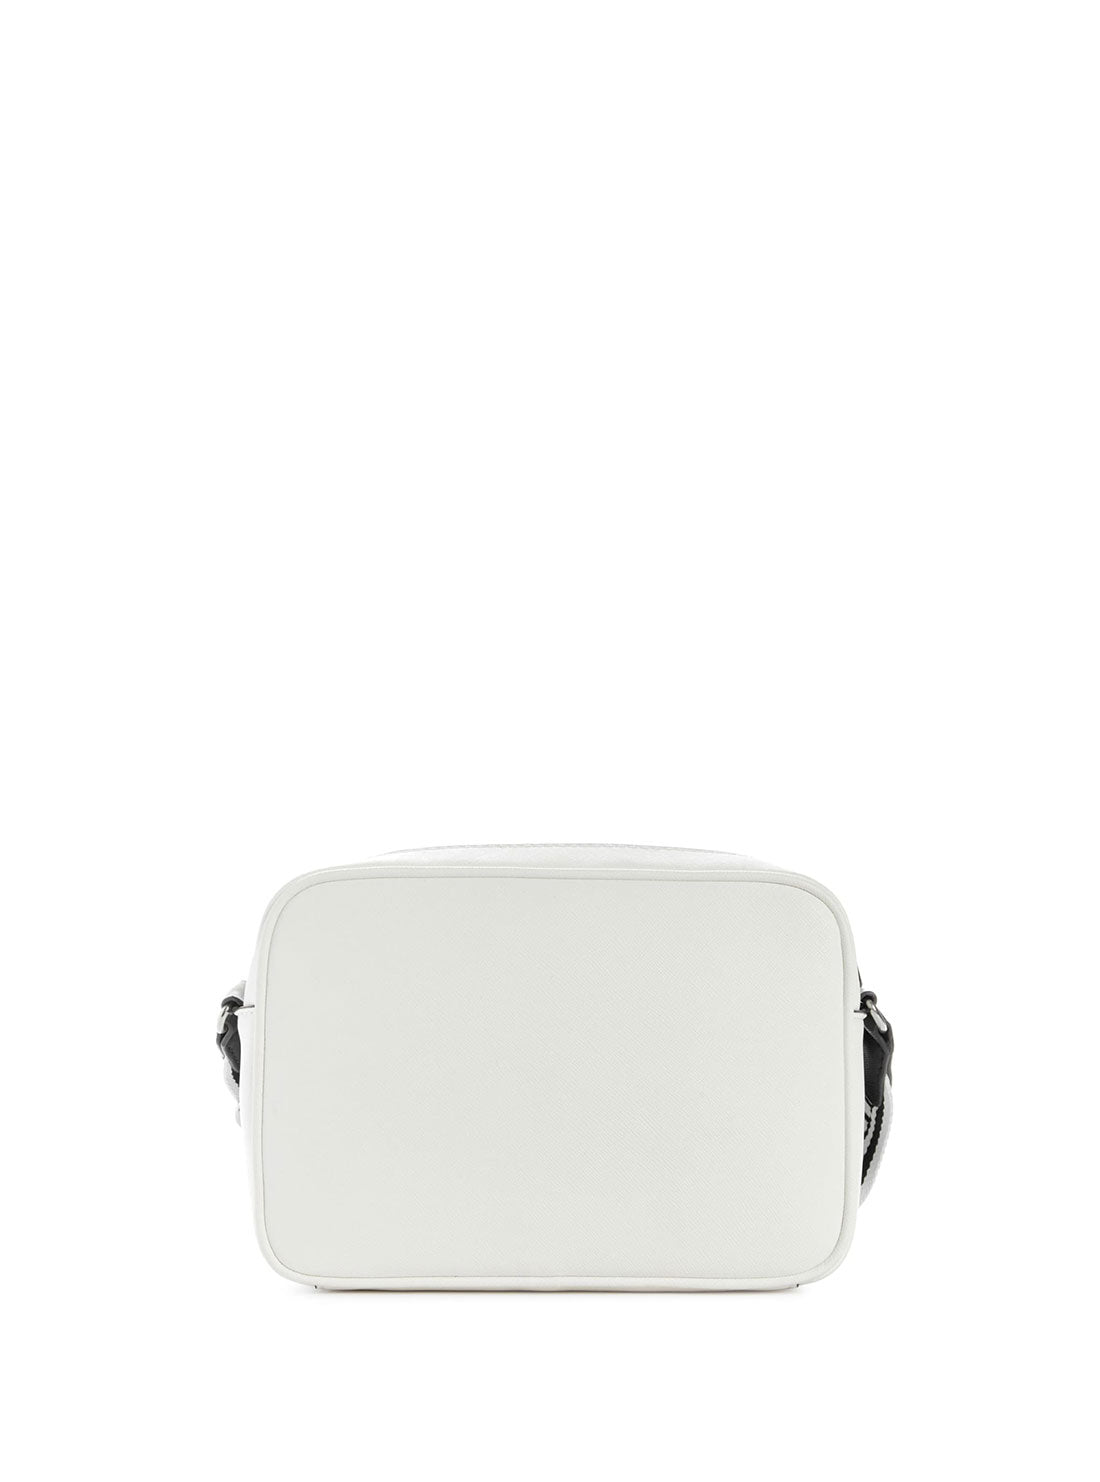 GUESS White Pennywise Crossbody Bag back view